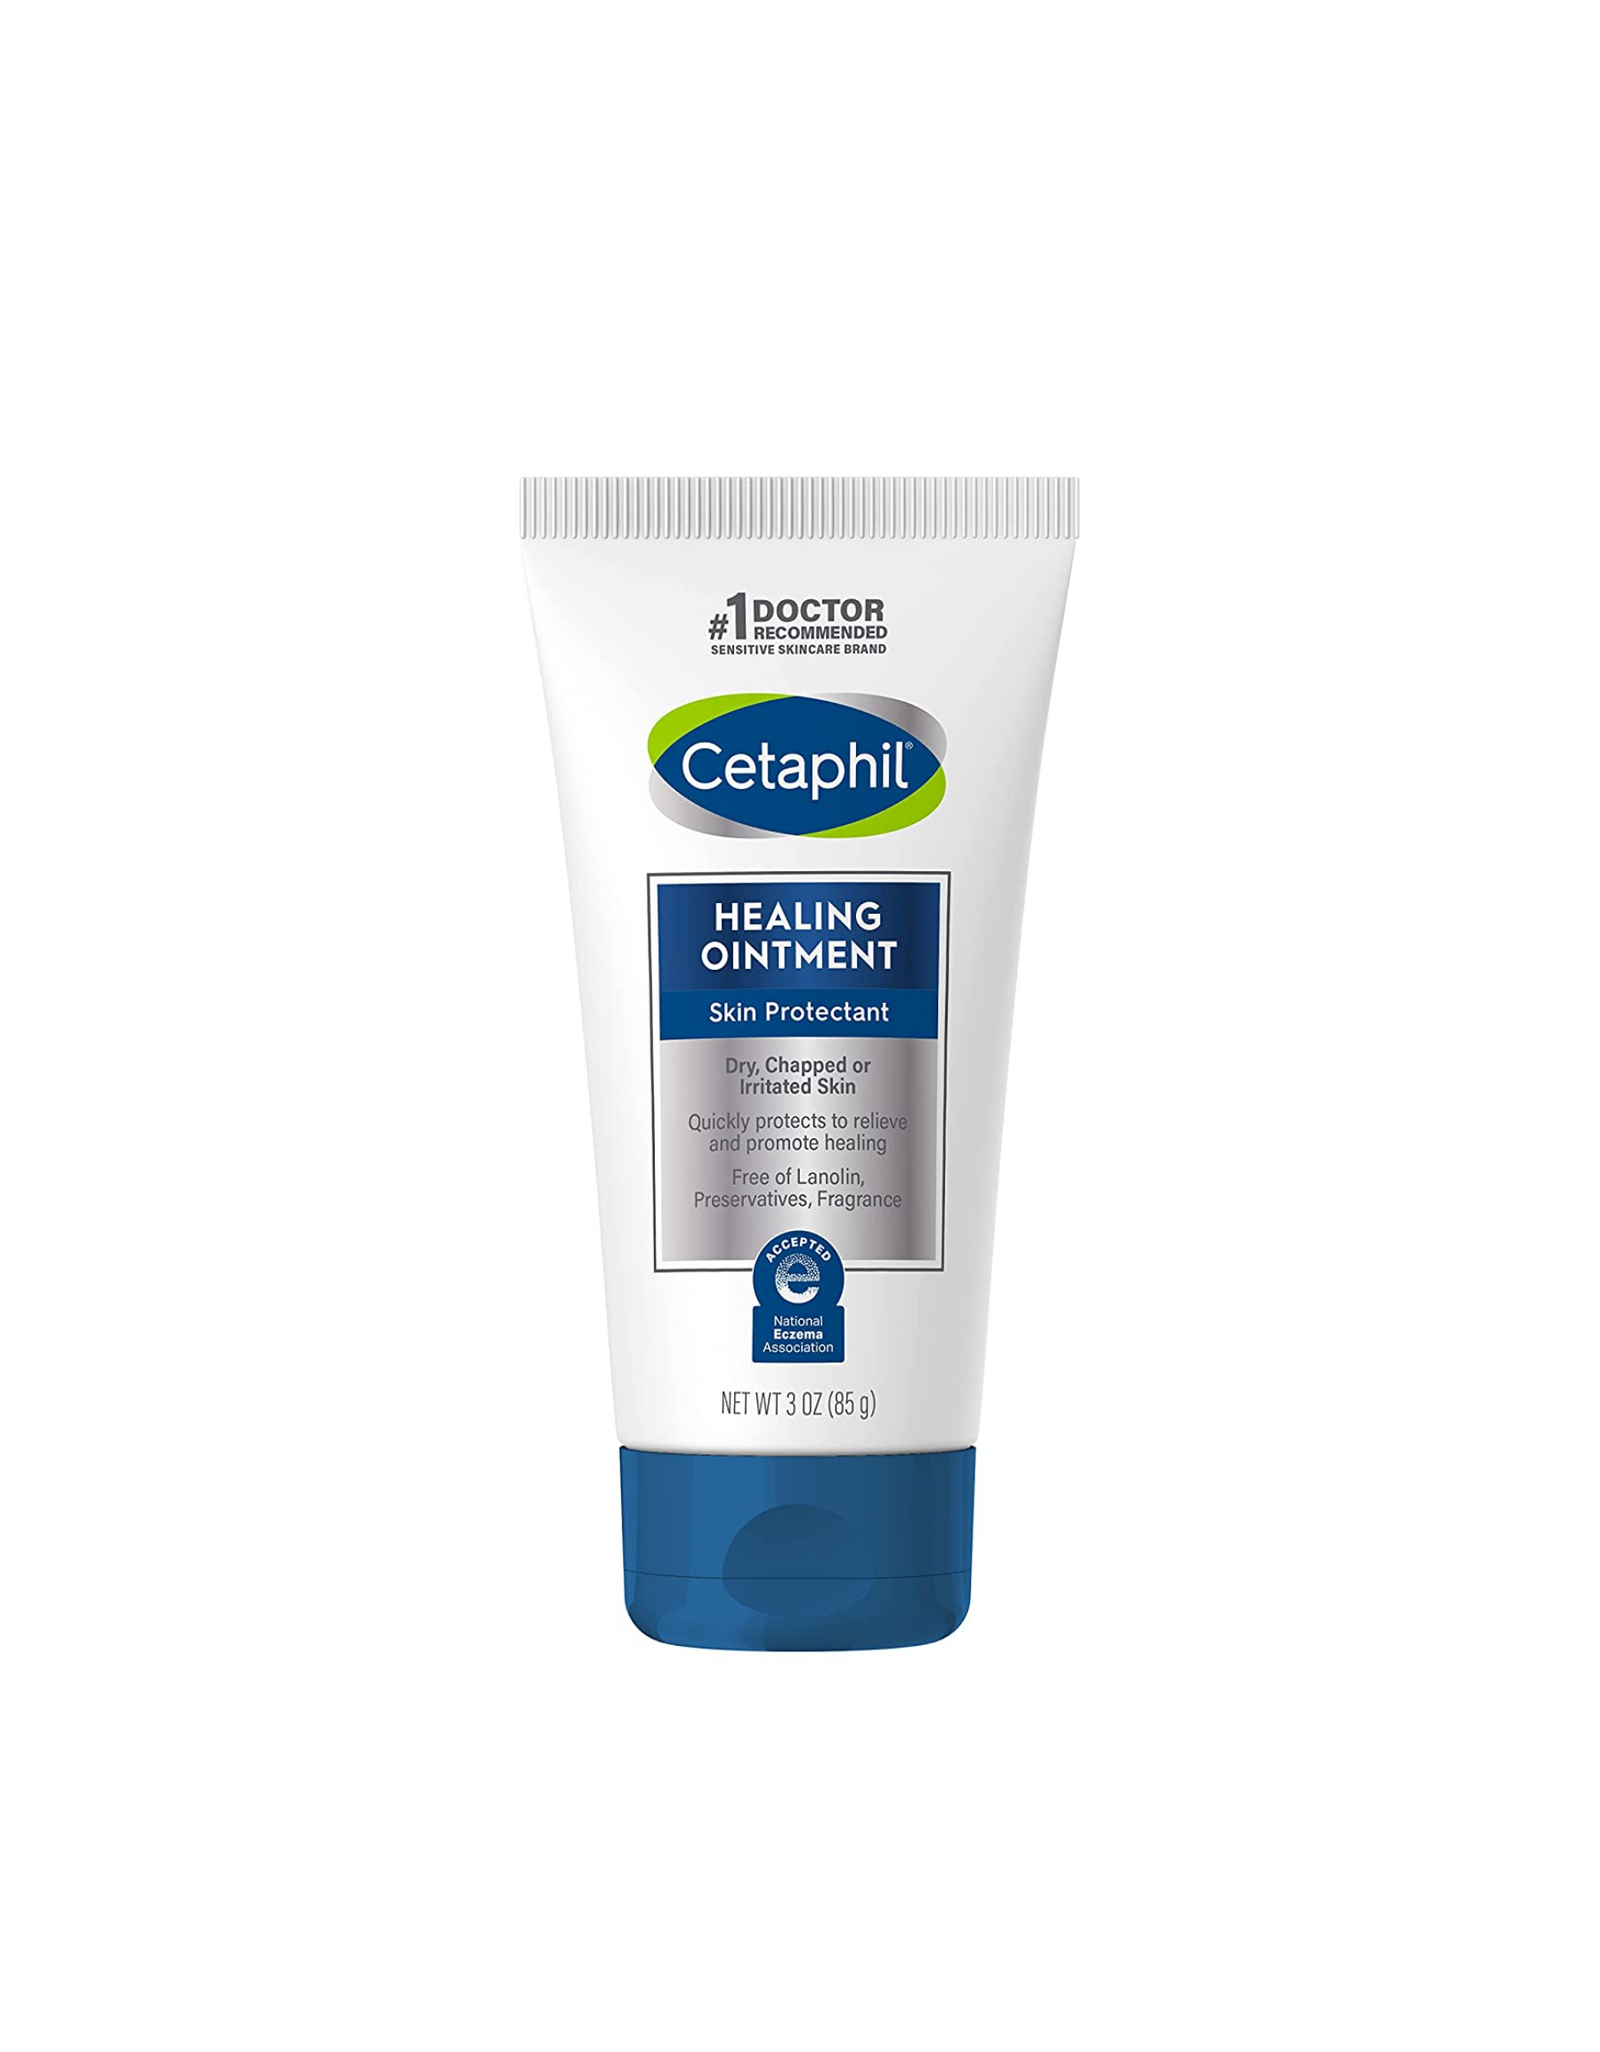 CETAPHIL Healing Ointment ,3 oz - Skin Protectant, For Dry, Chapped, Irritated Skin